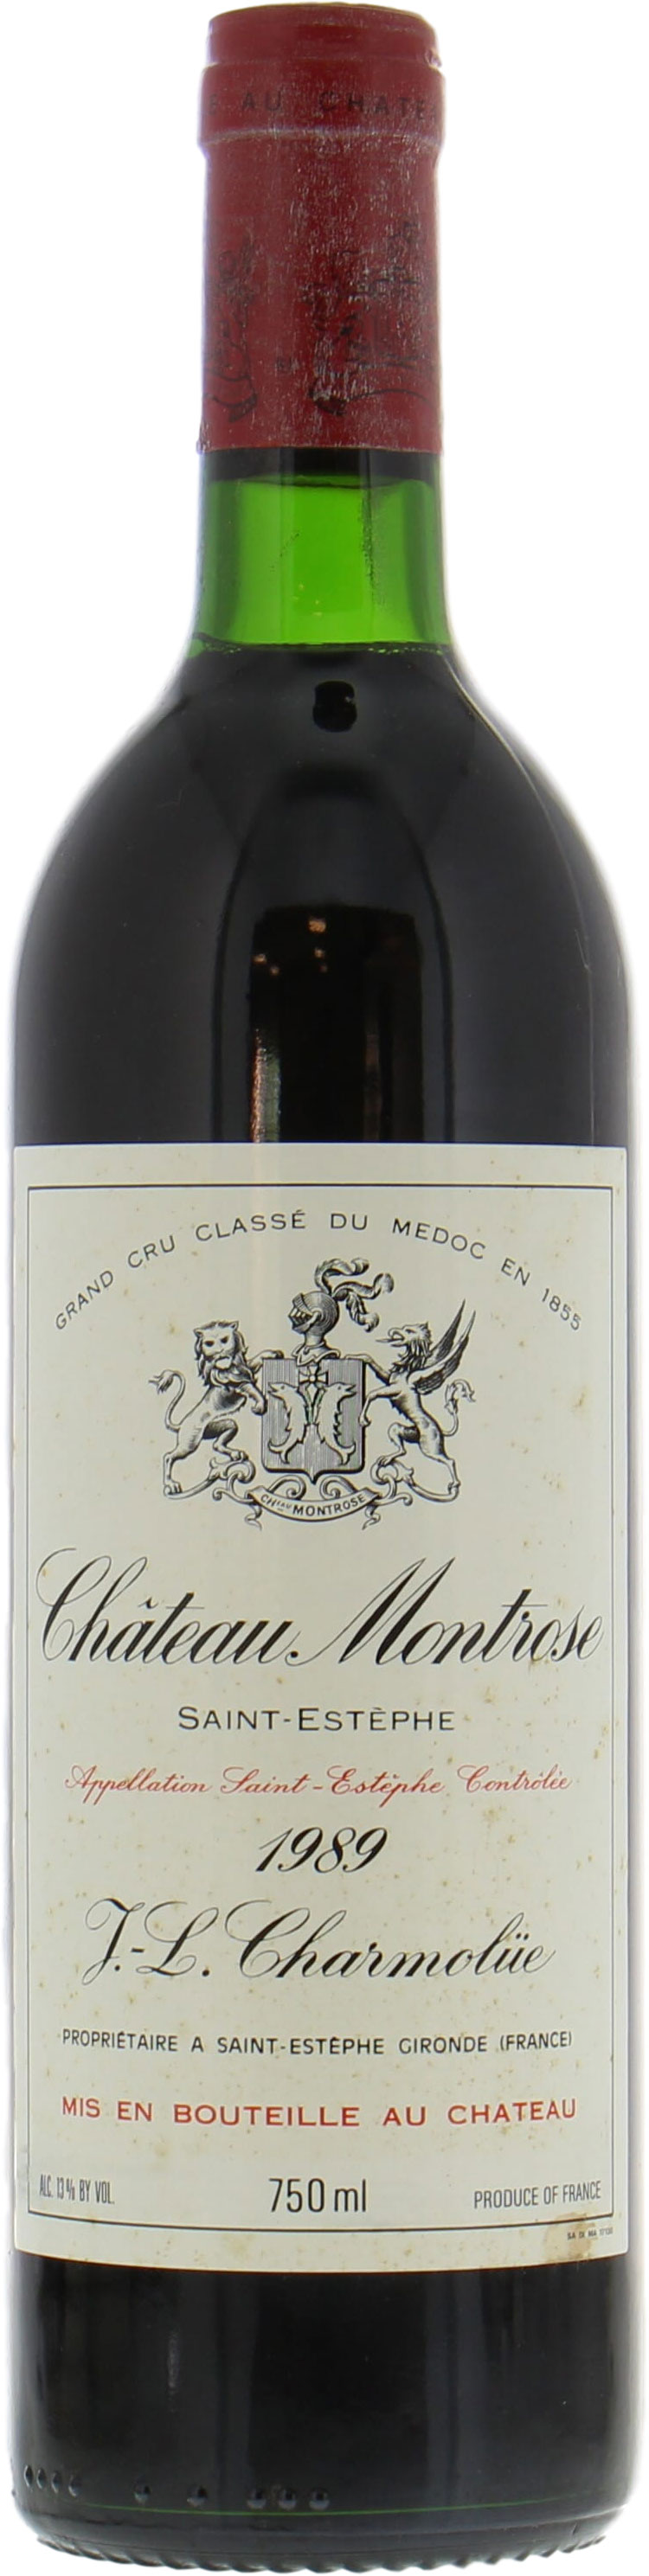 Chateau Montrose - Chateau Montrose 1989 Base of neck or better